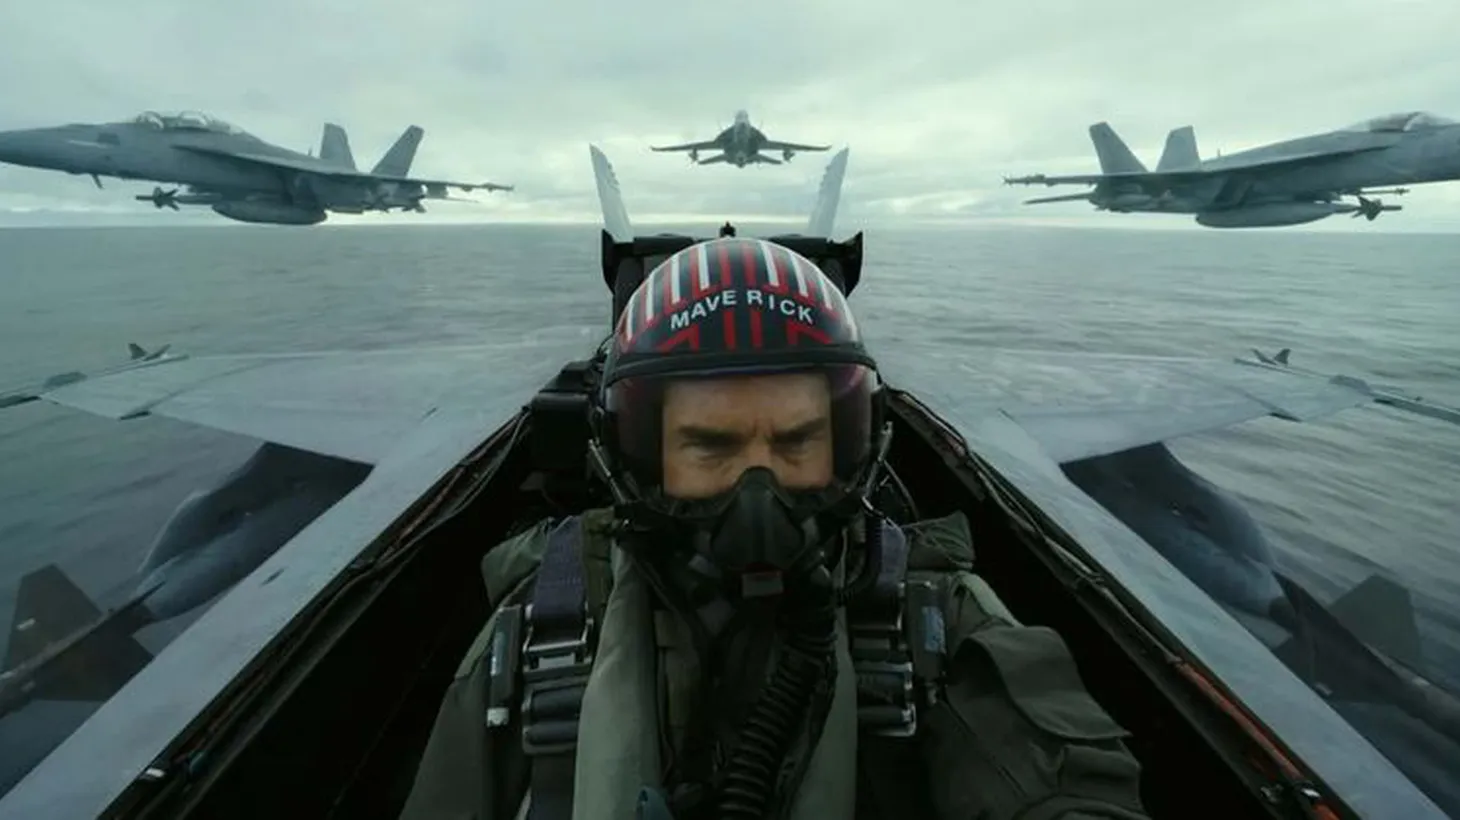 Tom Cruise plays Captain Pete "Maverick" Mitchell in "Top Gun: Maverick.” The film is expected to break box office records.